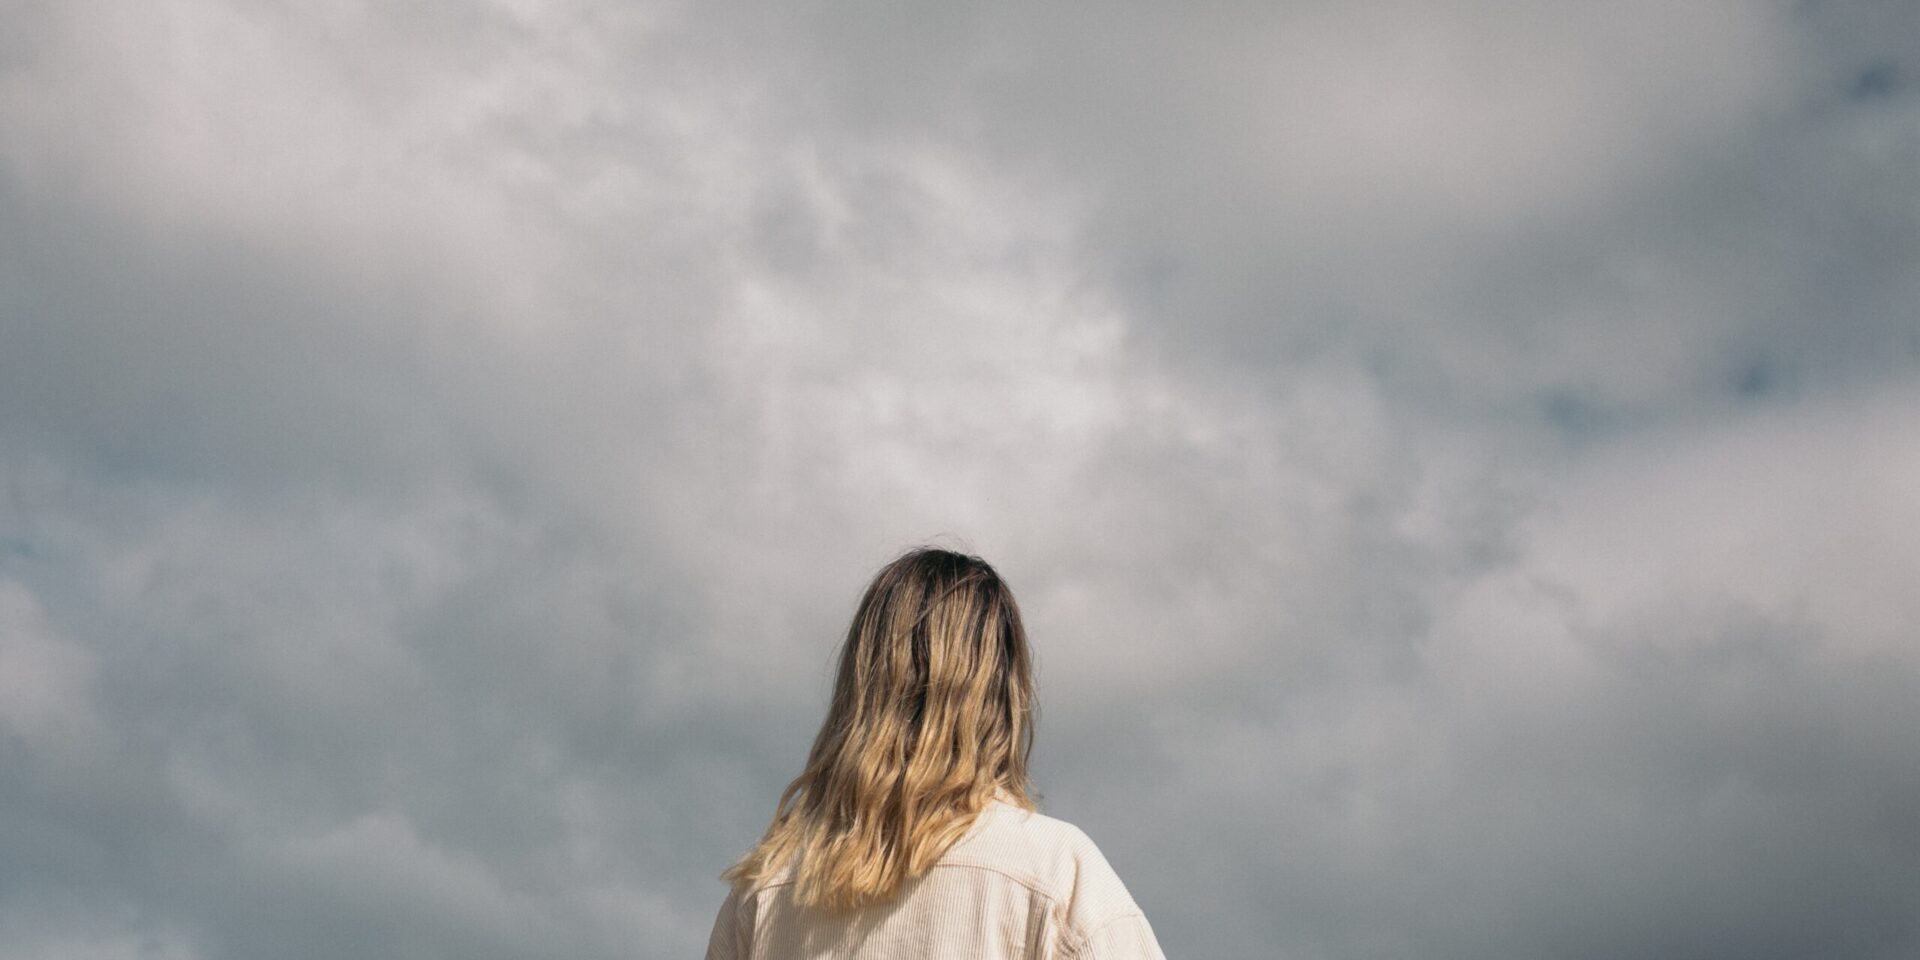 A woman standing in front of a cloudy sky. Search how online therapy can offer support with addressing seasonal affective disorder. Contact an online therapist in California for more support.